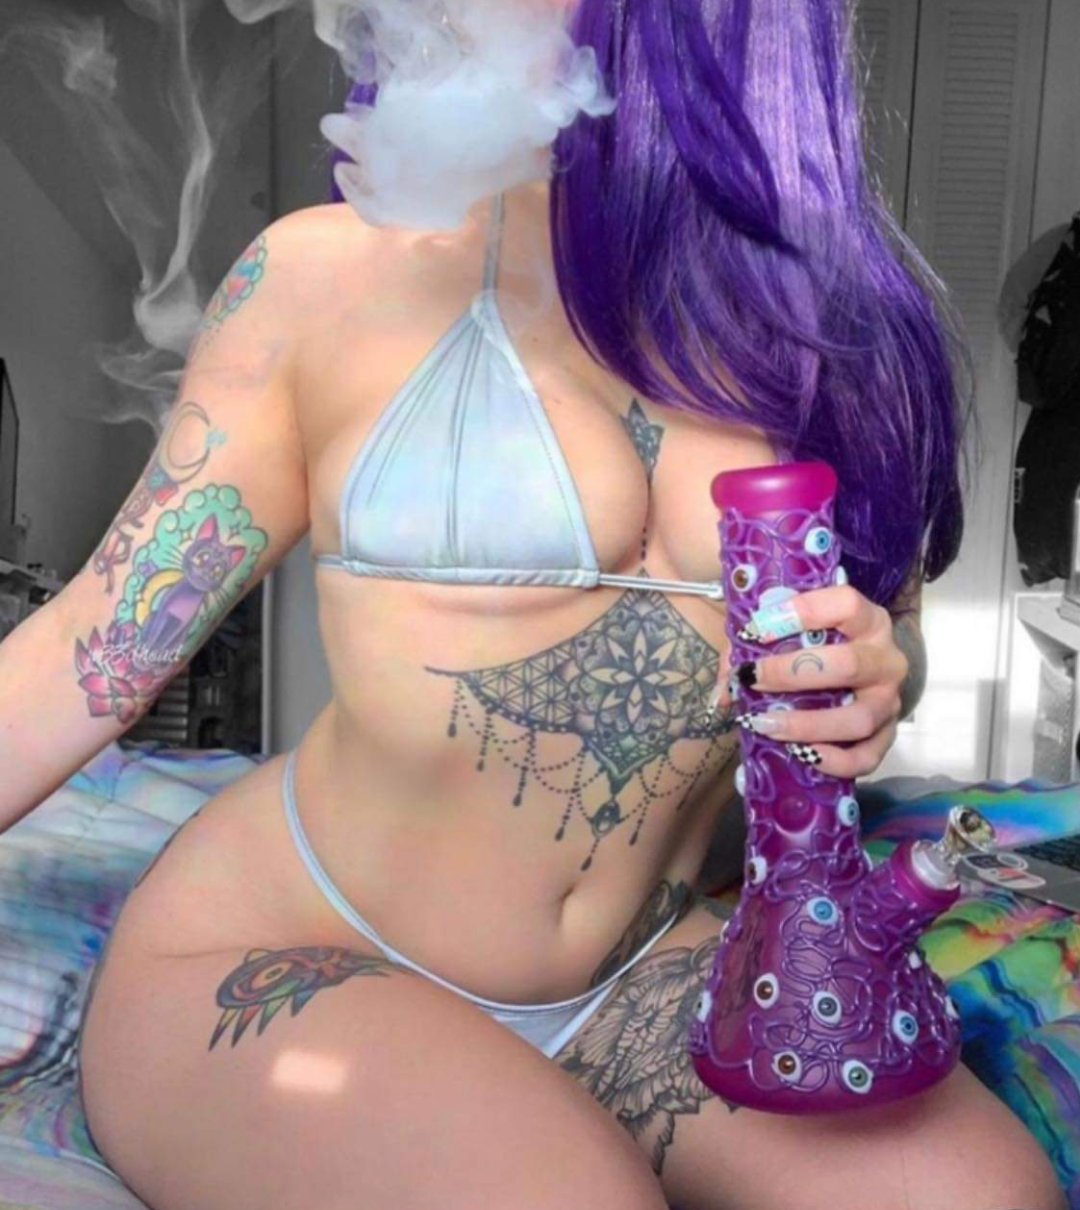 Photo by Ukelele with the username @Ukelele,  December 21, 2019 at 12:30 AM. The post is about the topic Horny & High and the text says '#purple #weed'